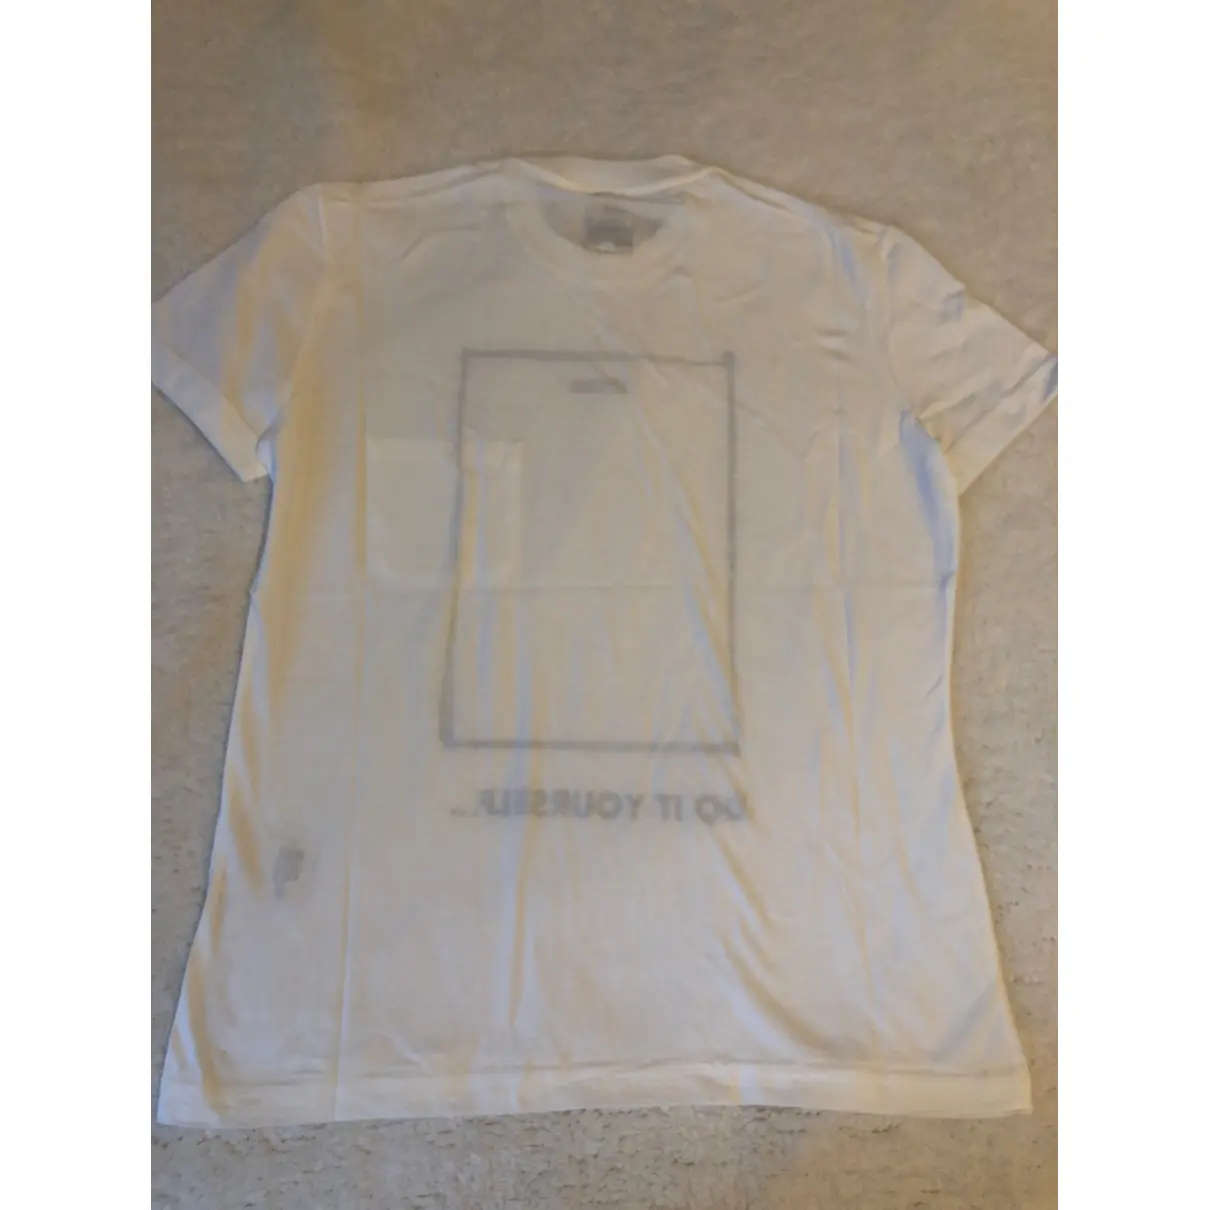 Buy Moschino T-shirt online - Vintage